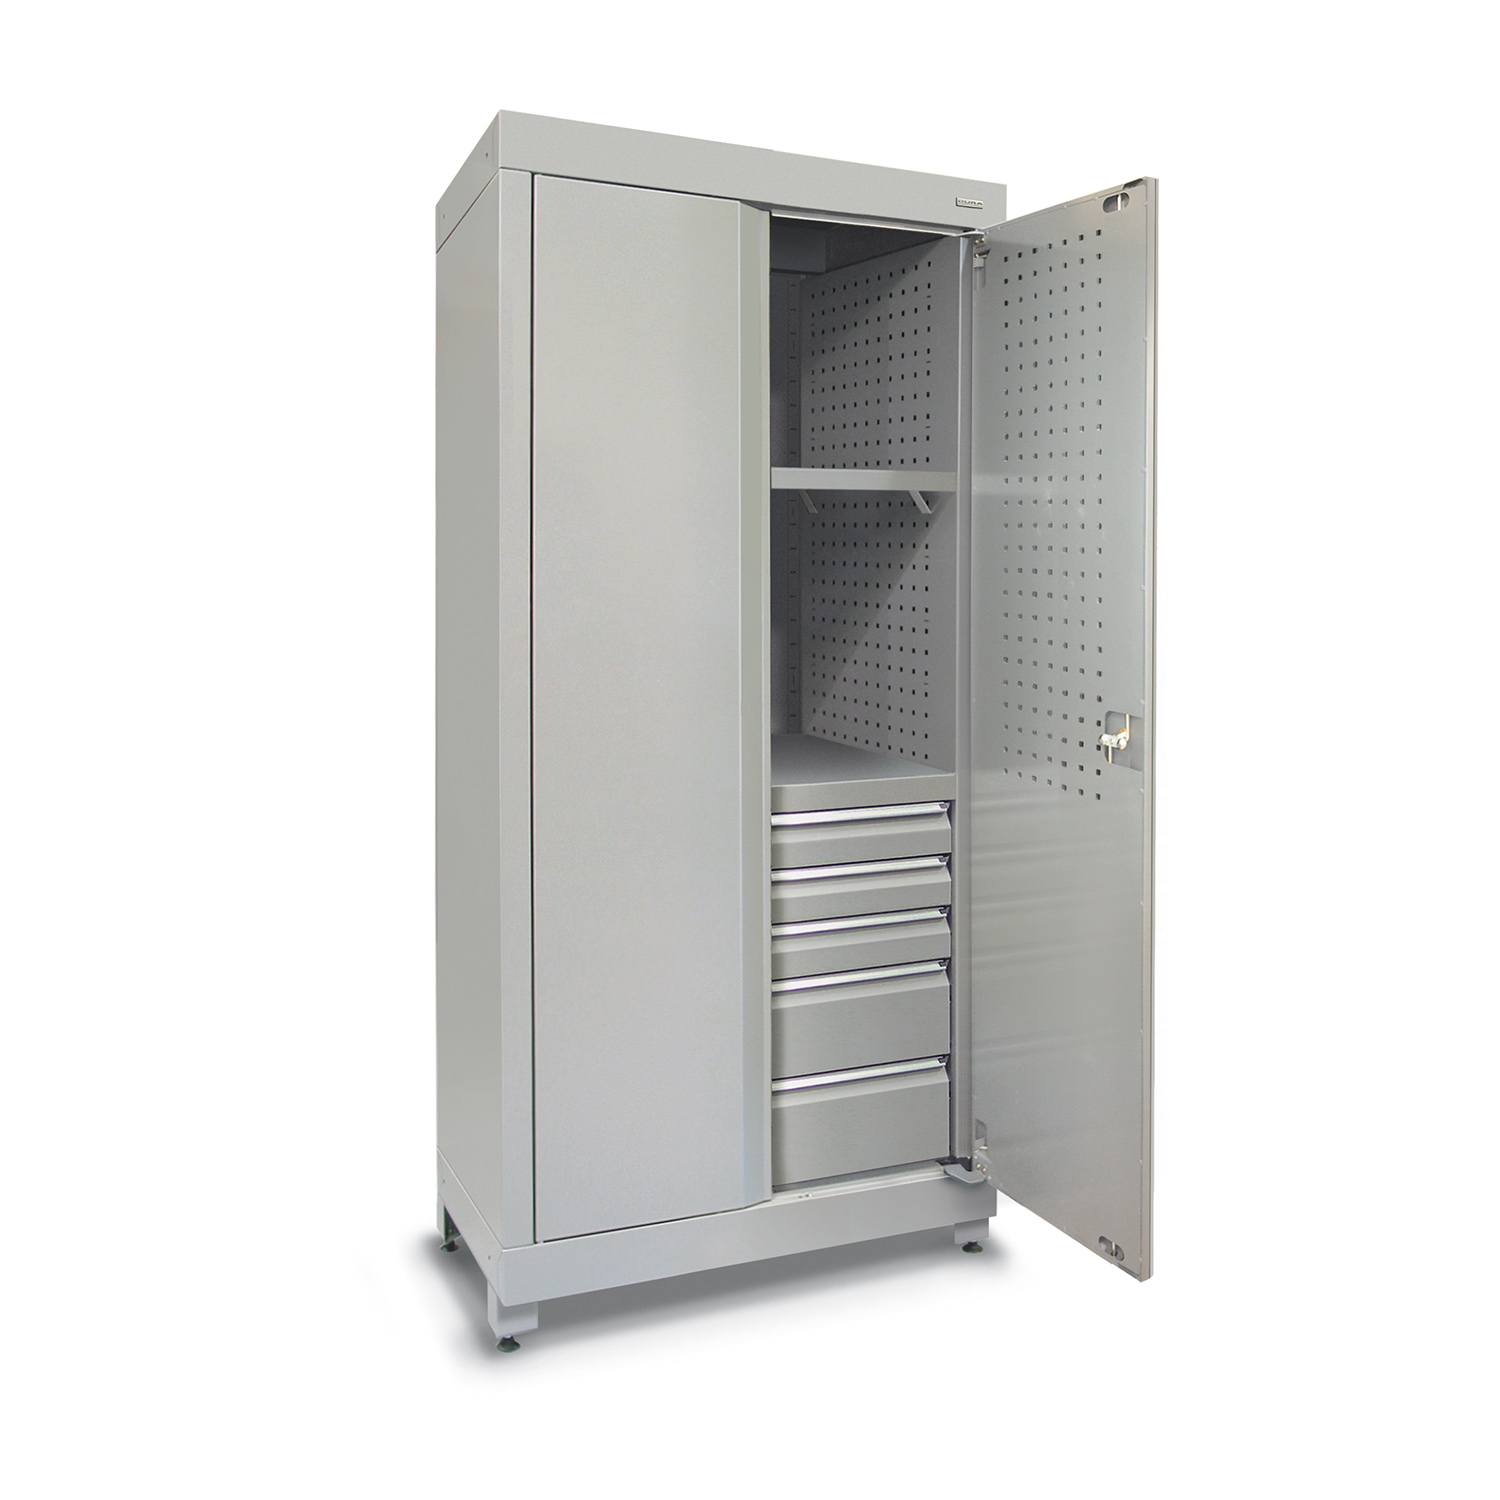 900mm Heavy-duty shelving unit with 5 drawers